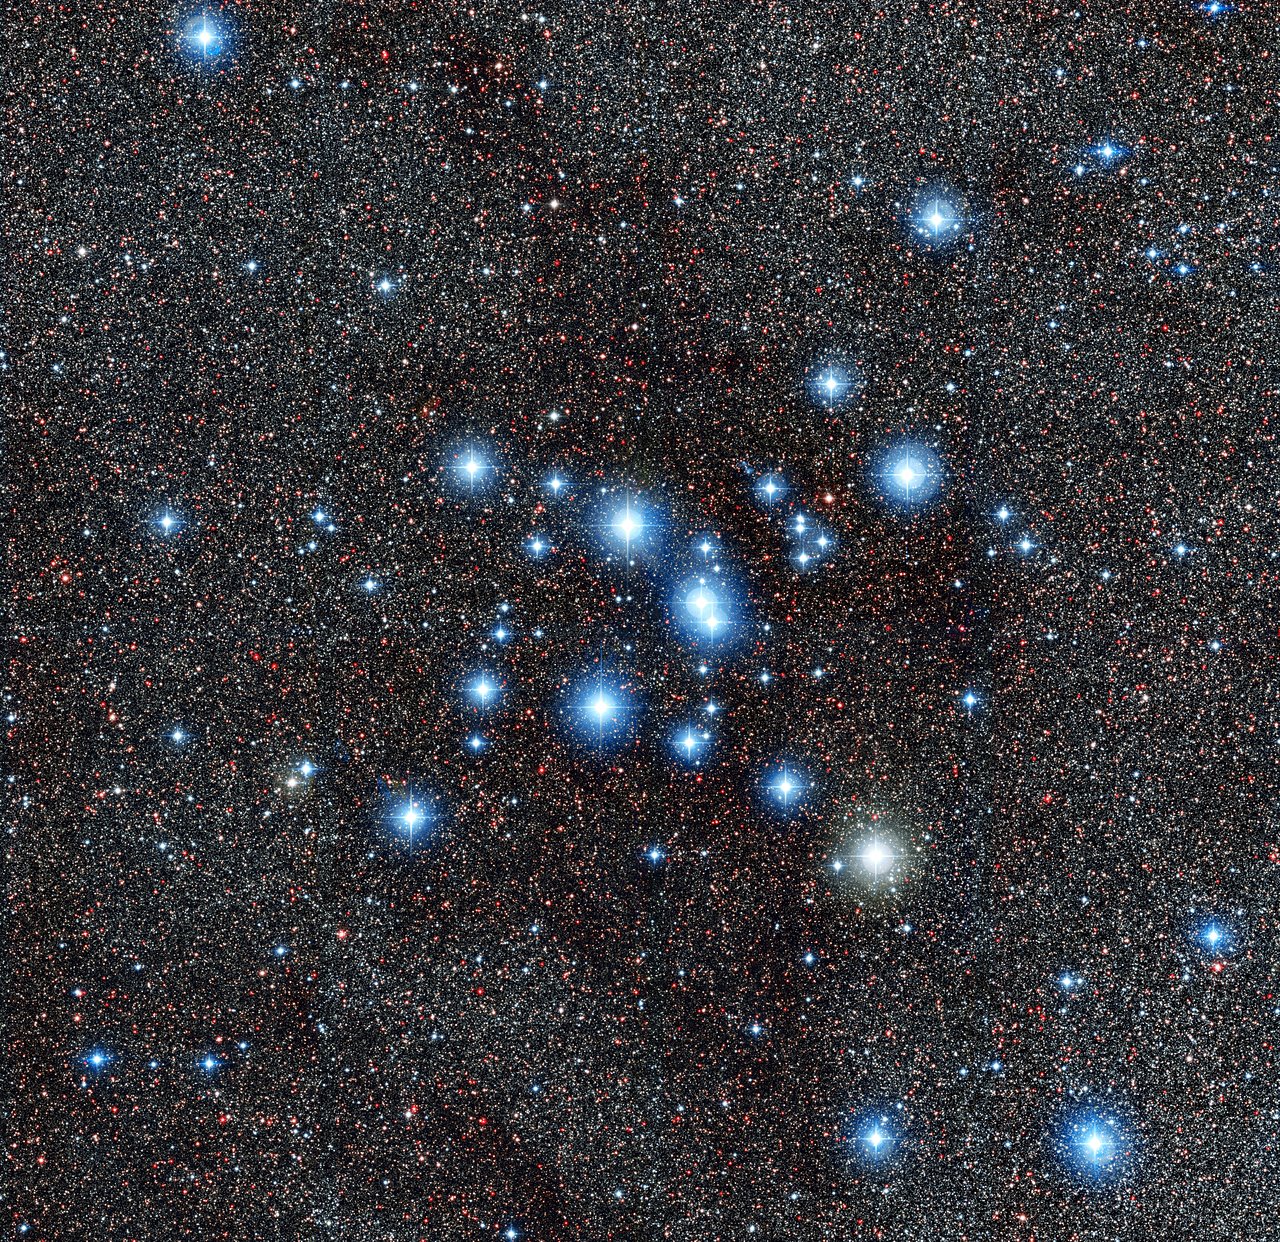 http://www.eso.org/public/archives/images/screen/eso1406a.jpg